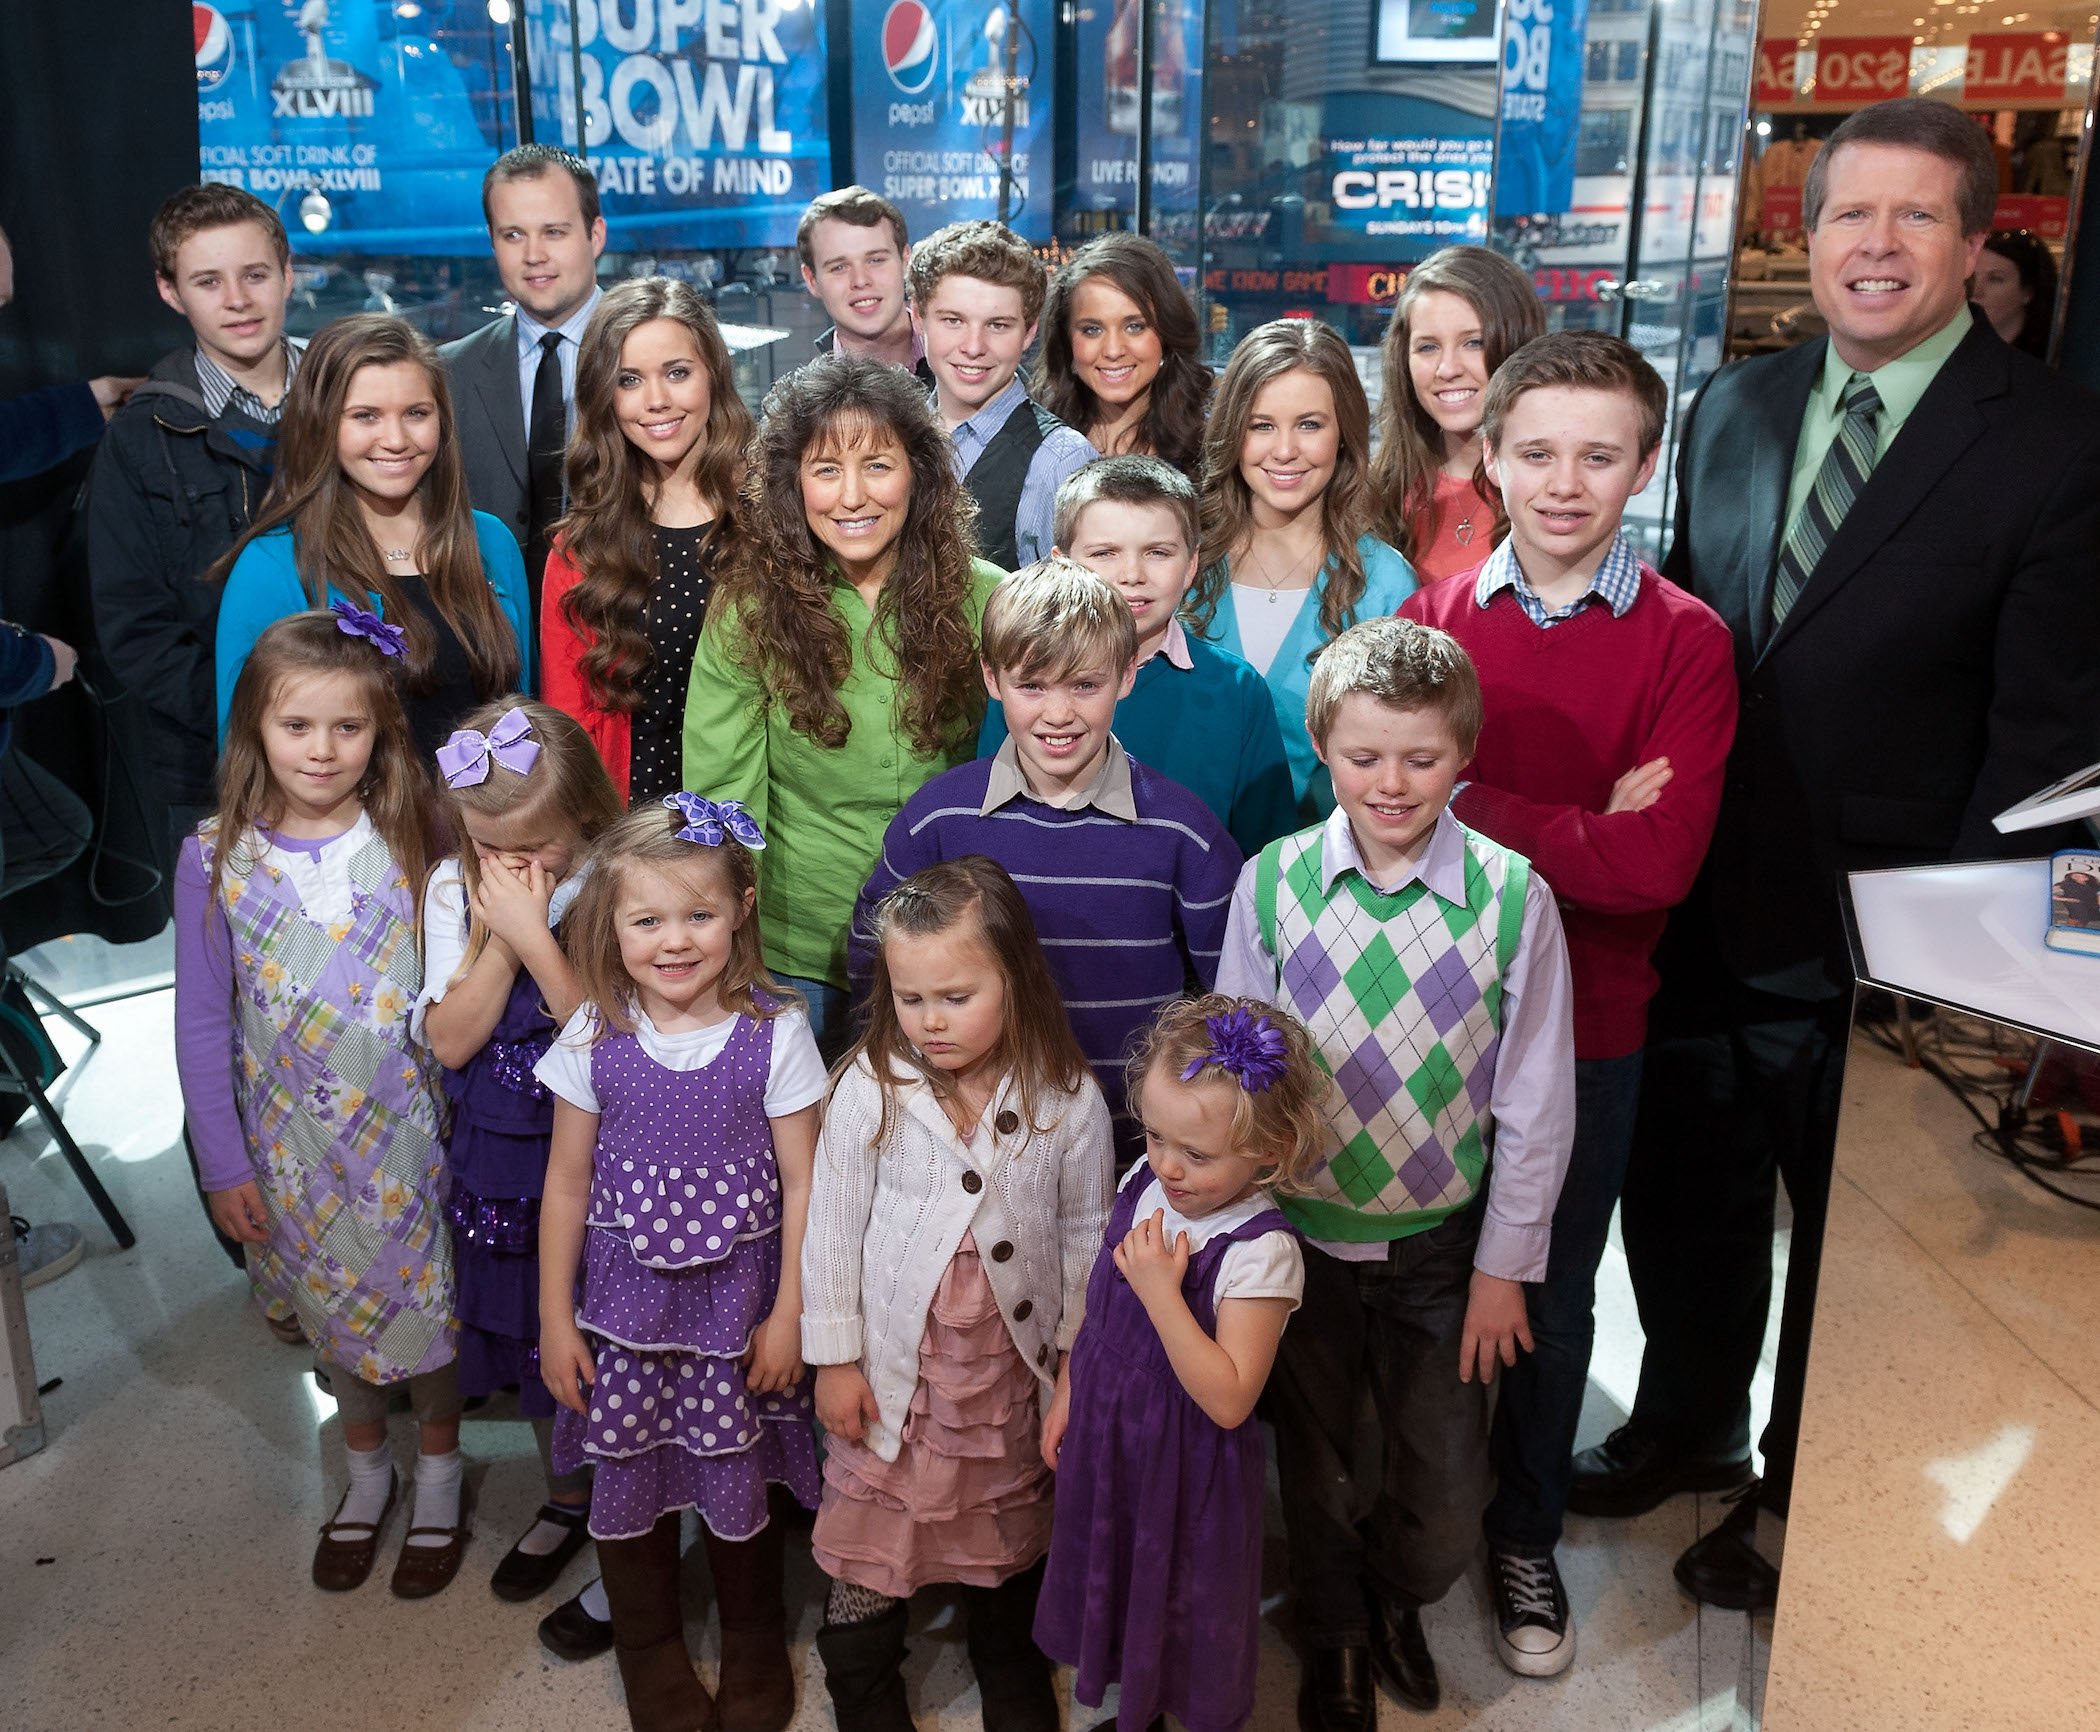 The Duggar family standing together and smiling